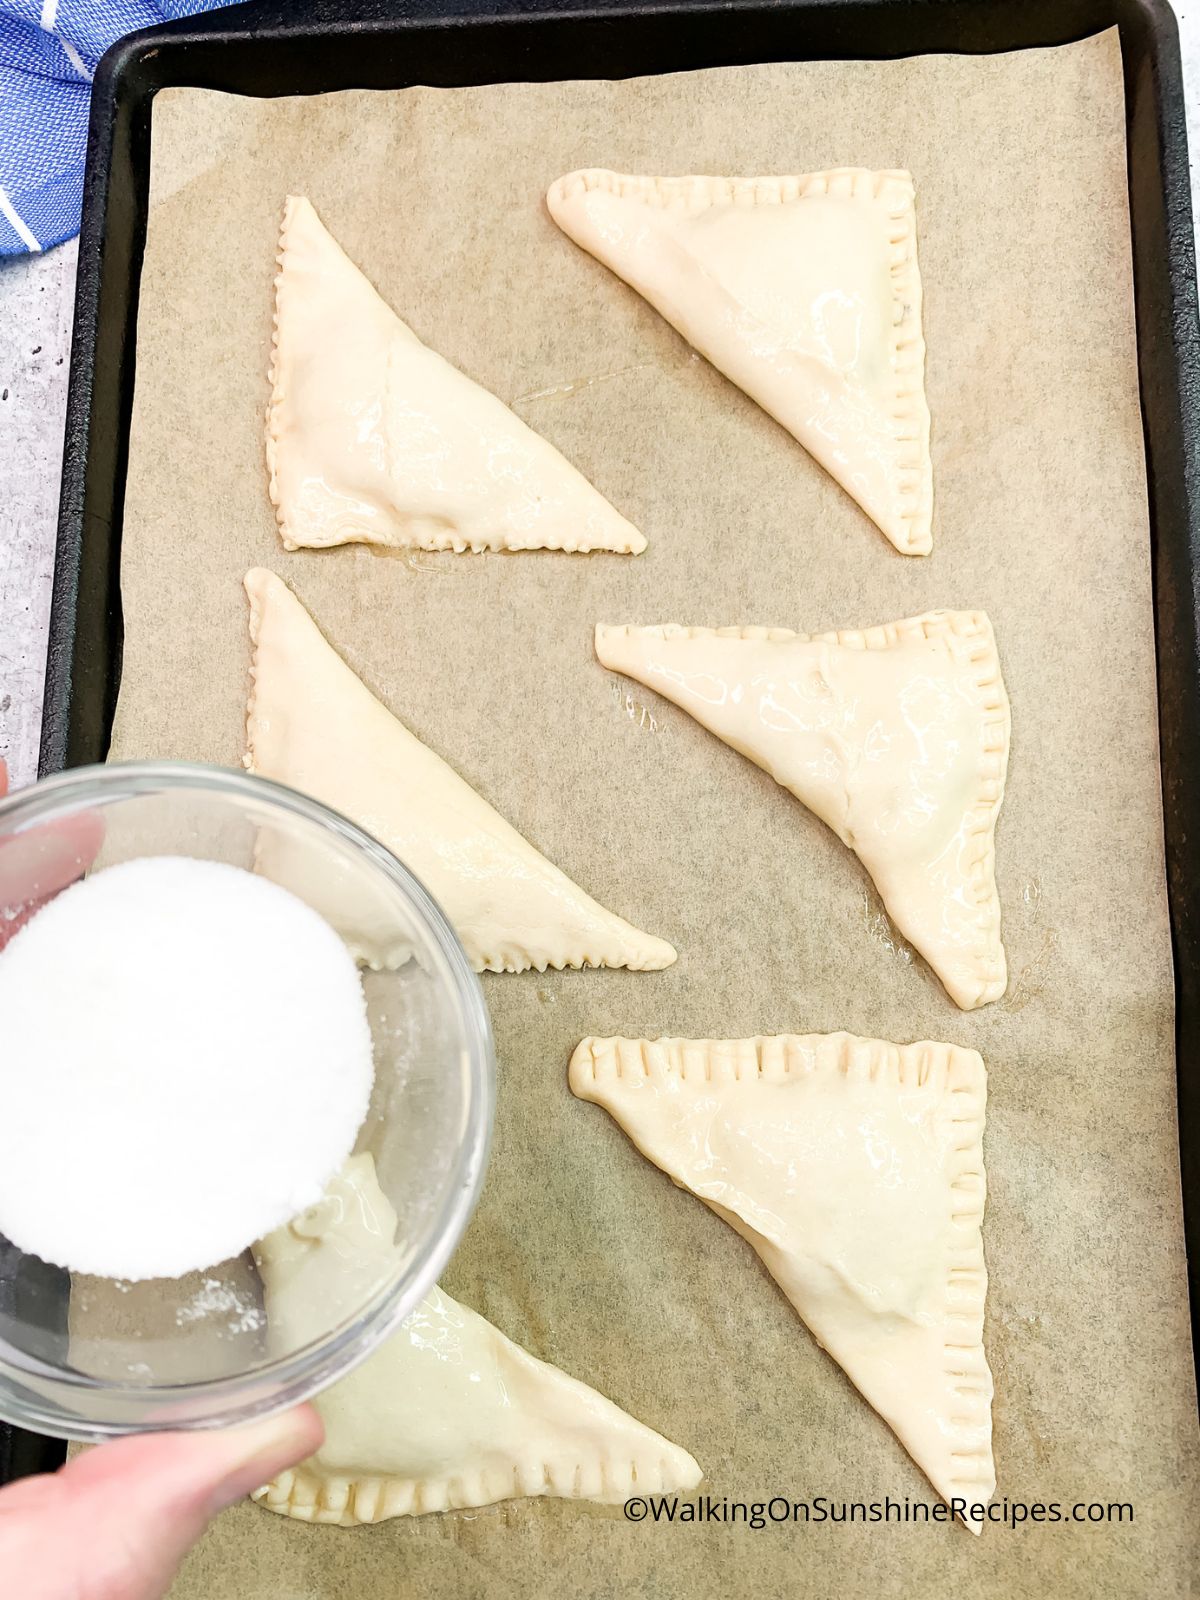 Dust turnovers with sugar before baking.